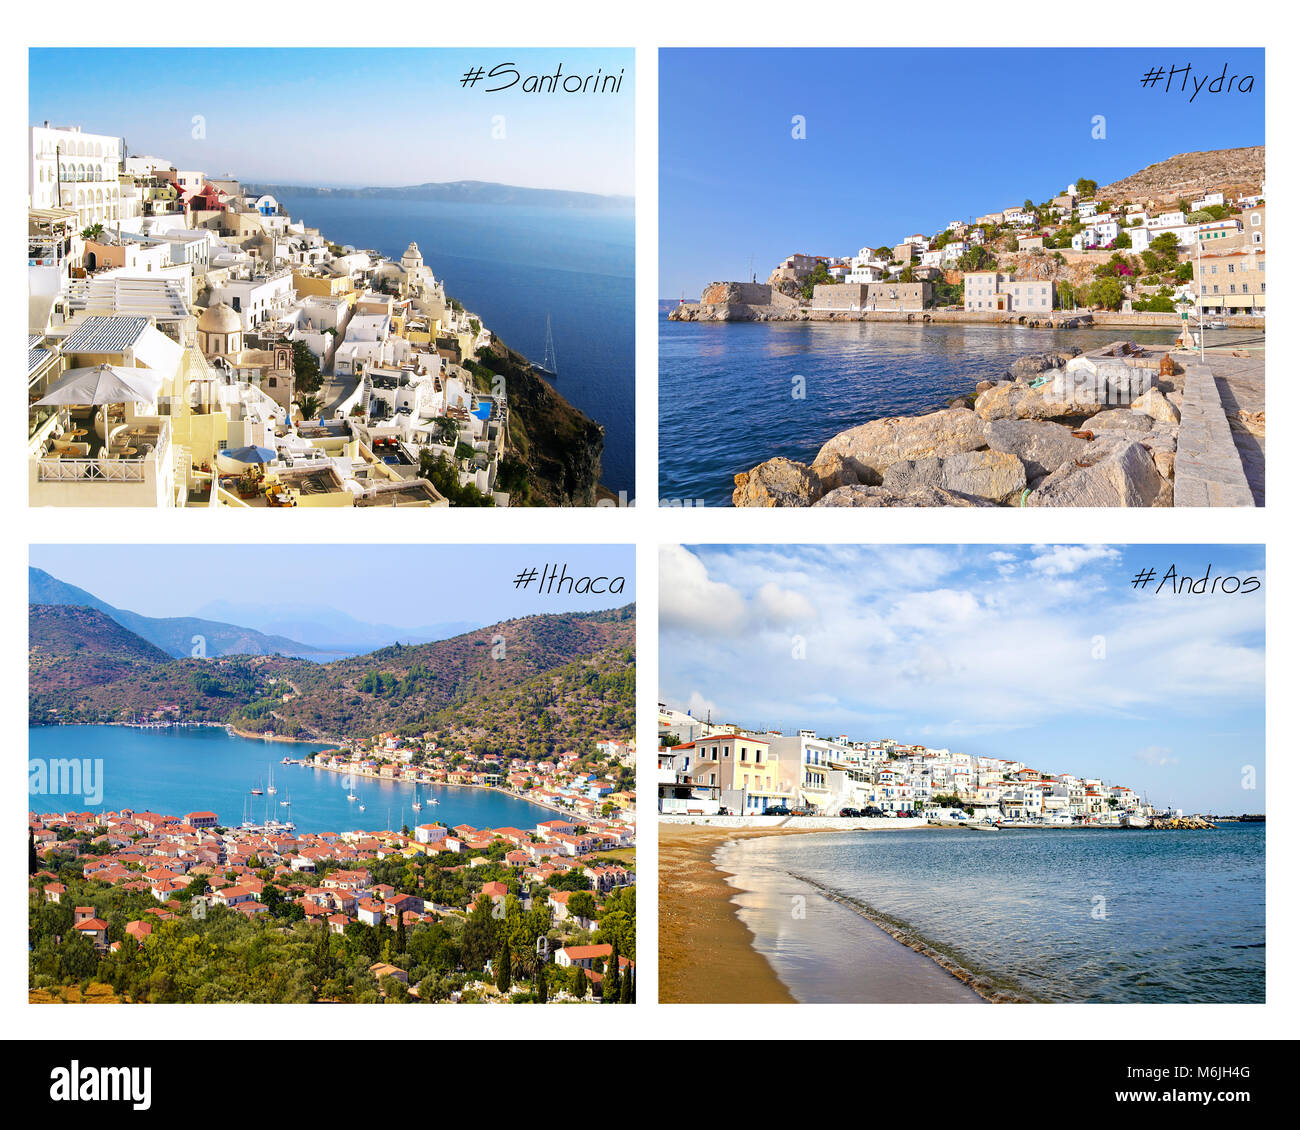 photo collage with greek islands - Ithaca, Santorini, Hydra, Andros Stock Photo